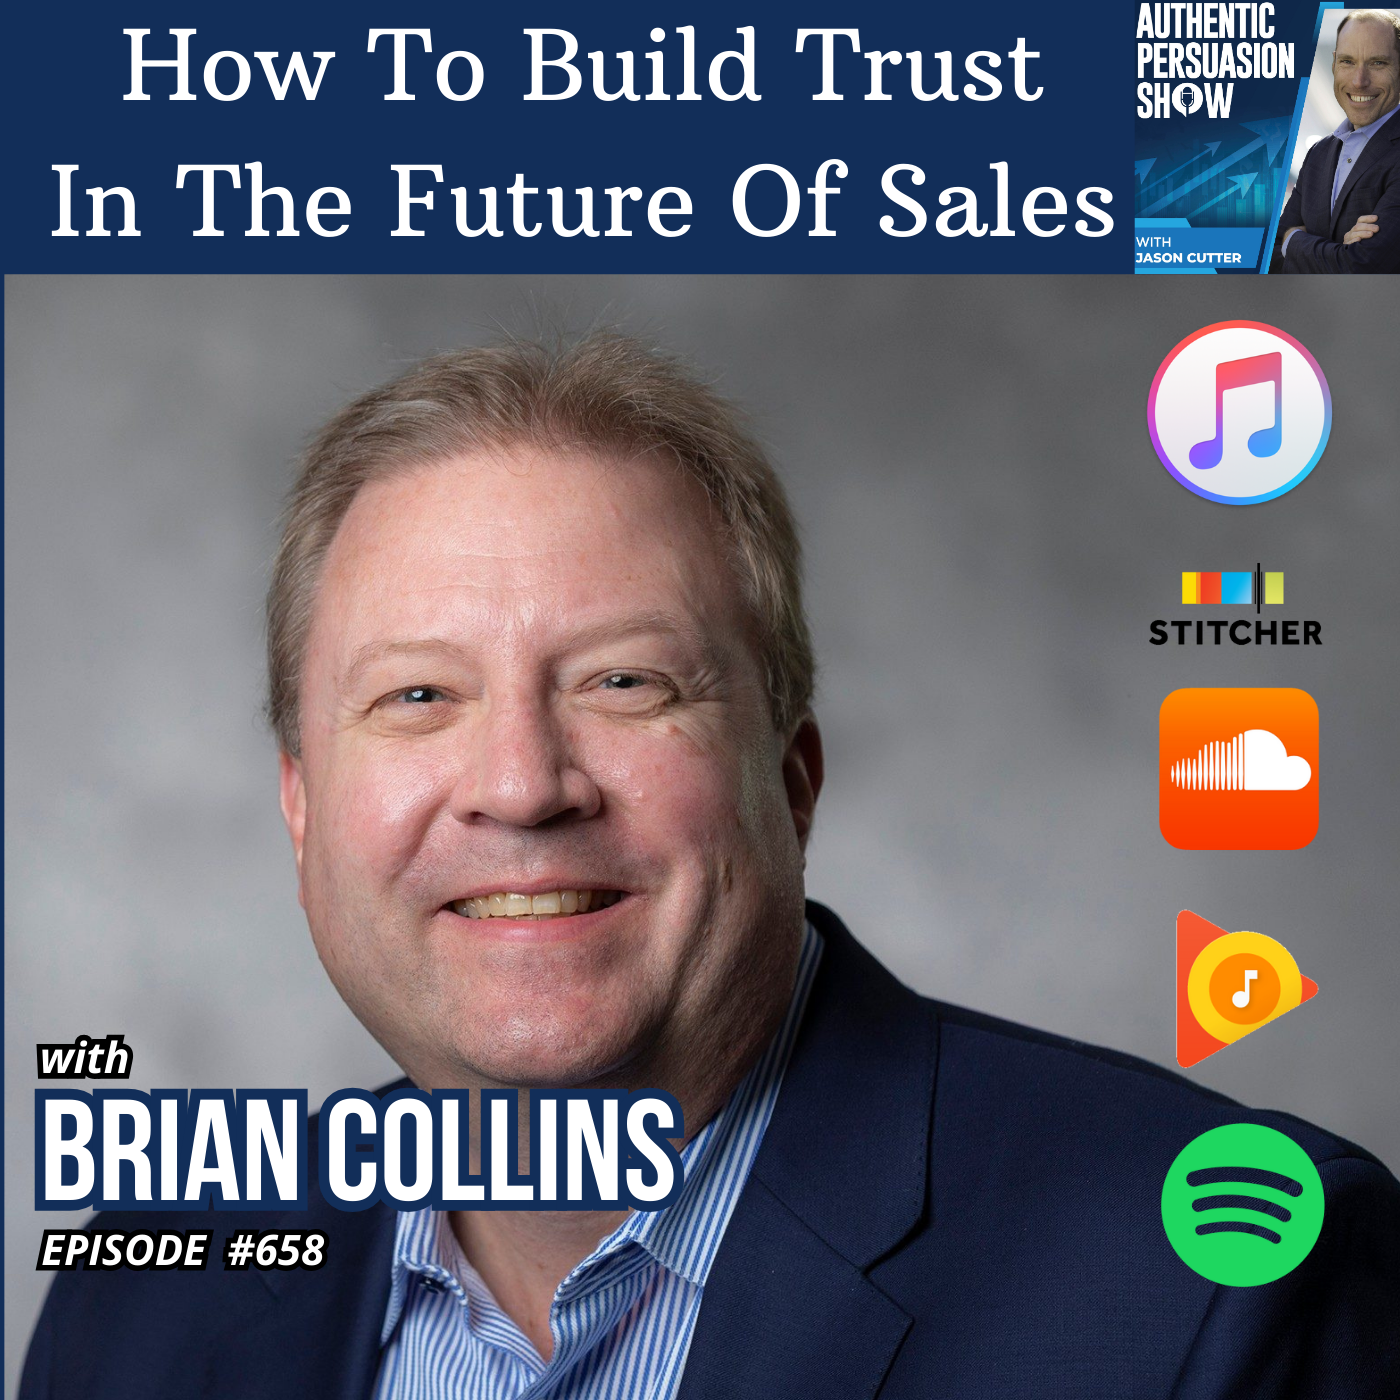 [658] How To Build Trust In The Future Of Sales, with Brian Collins from Virginia Tech